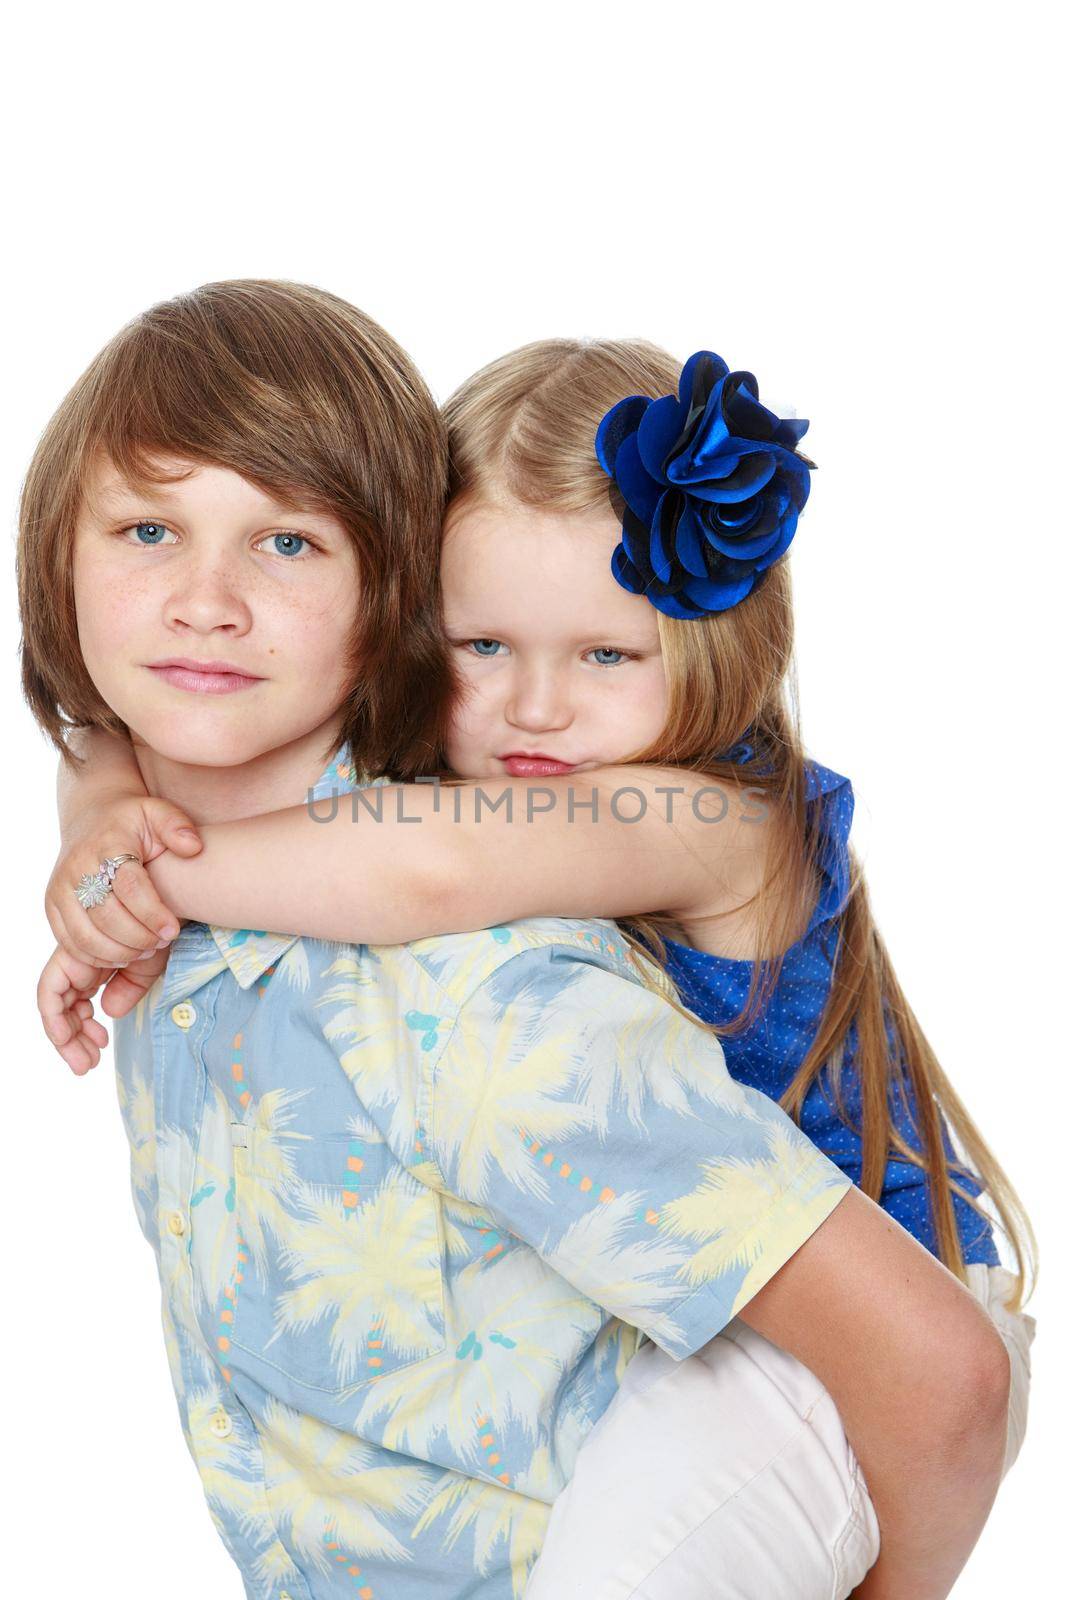 Beautiful little girl hugging his neck of his older brother. Close-up-Isolated on white background